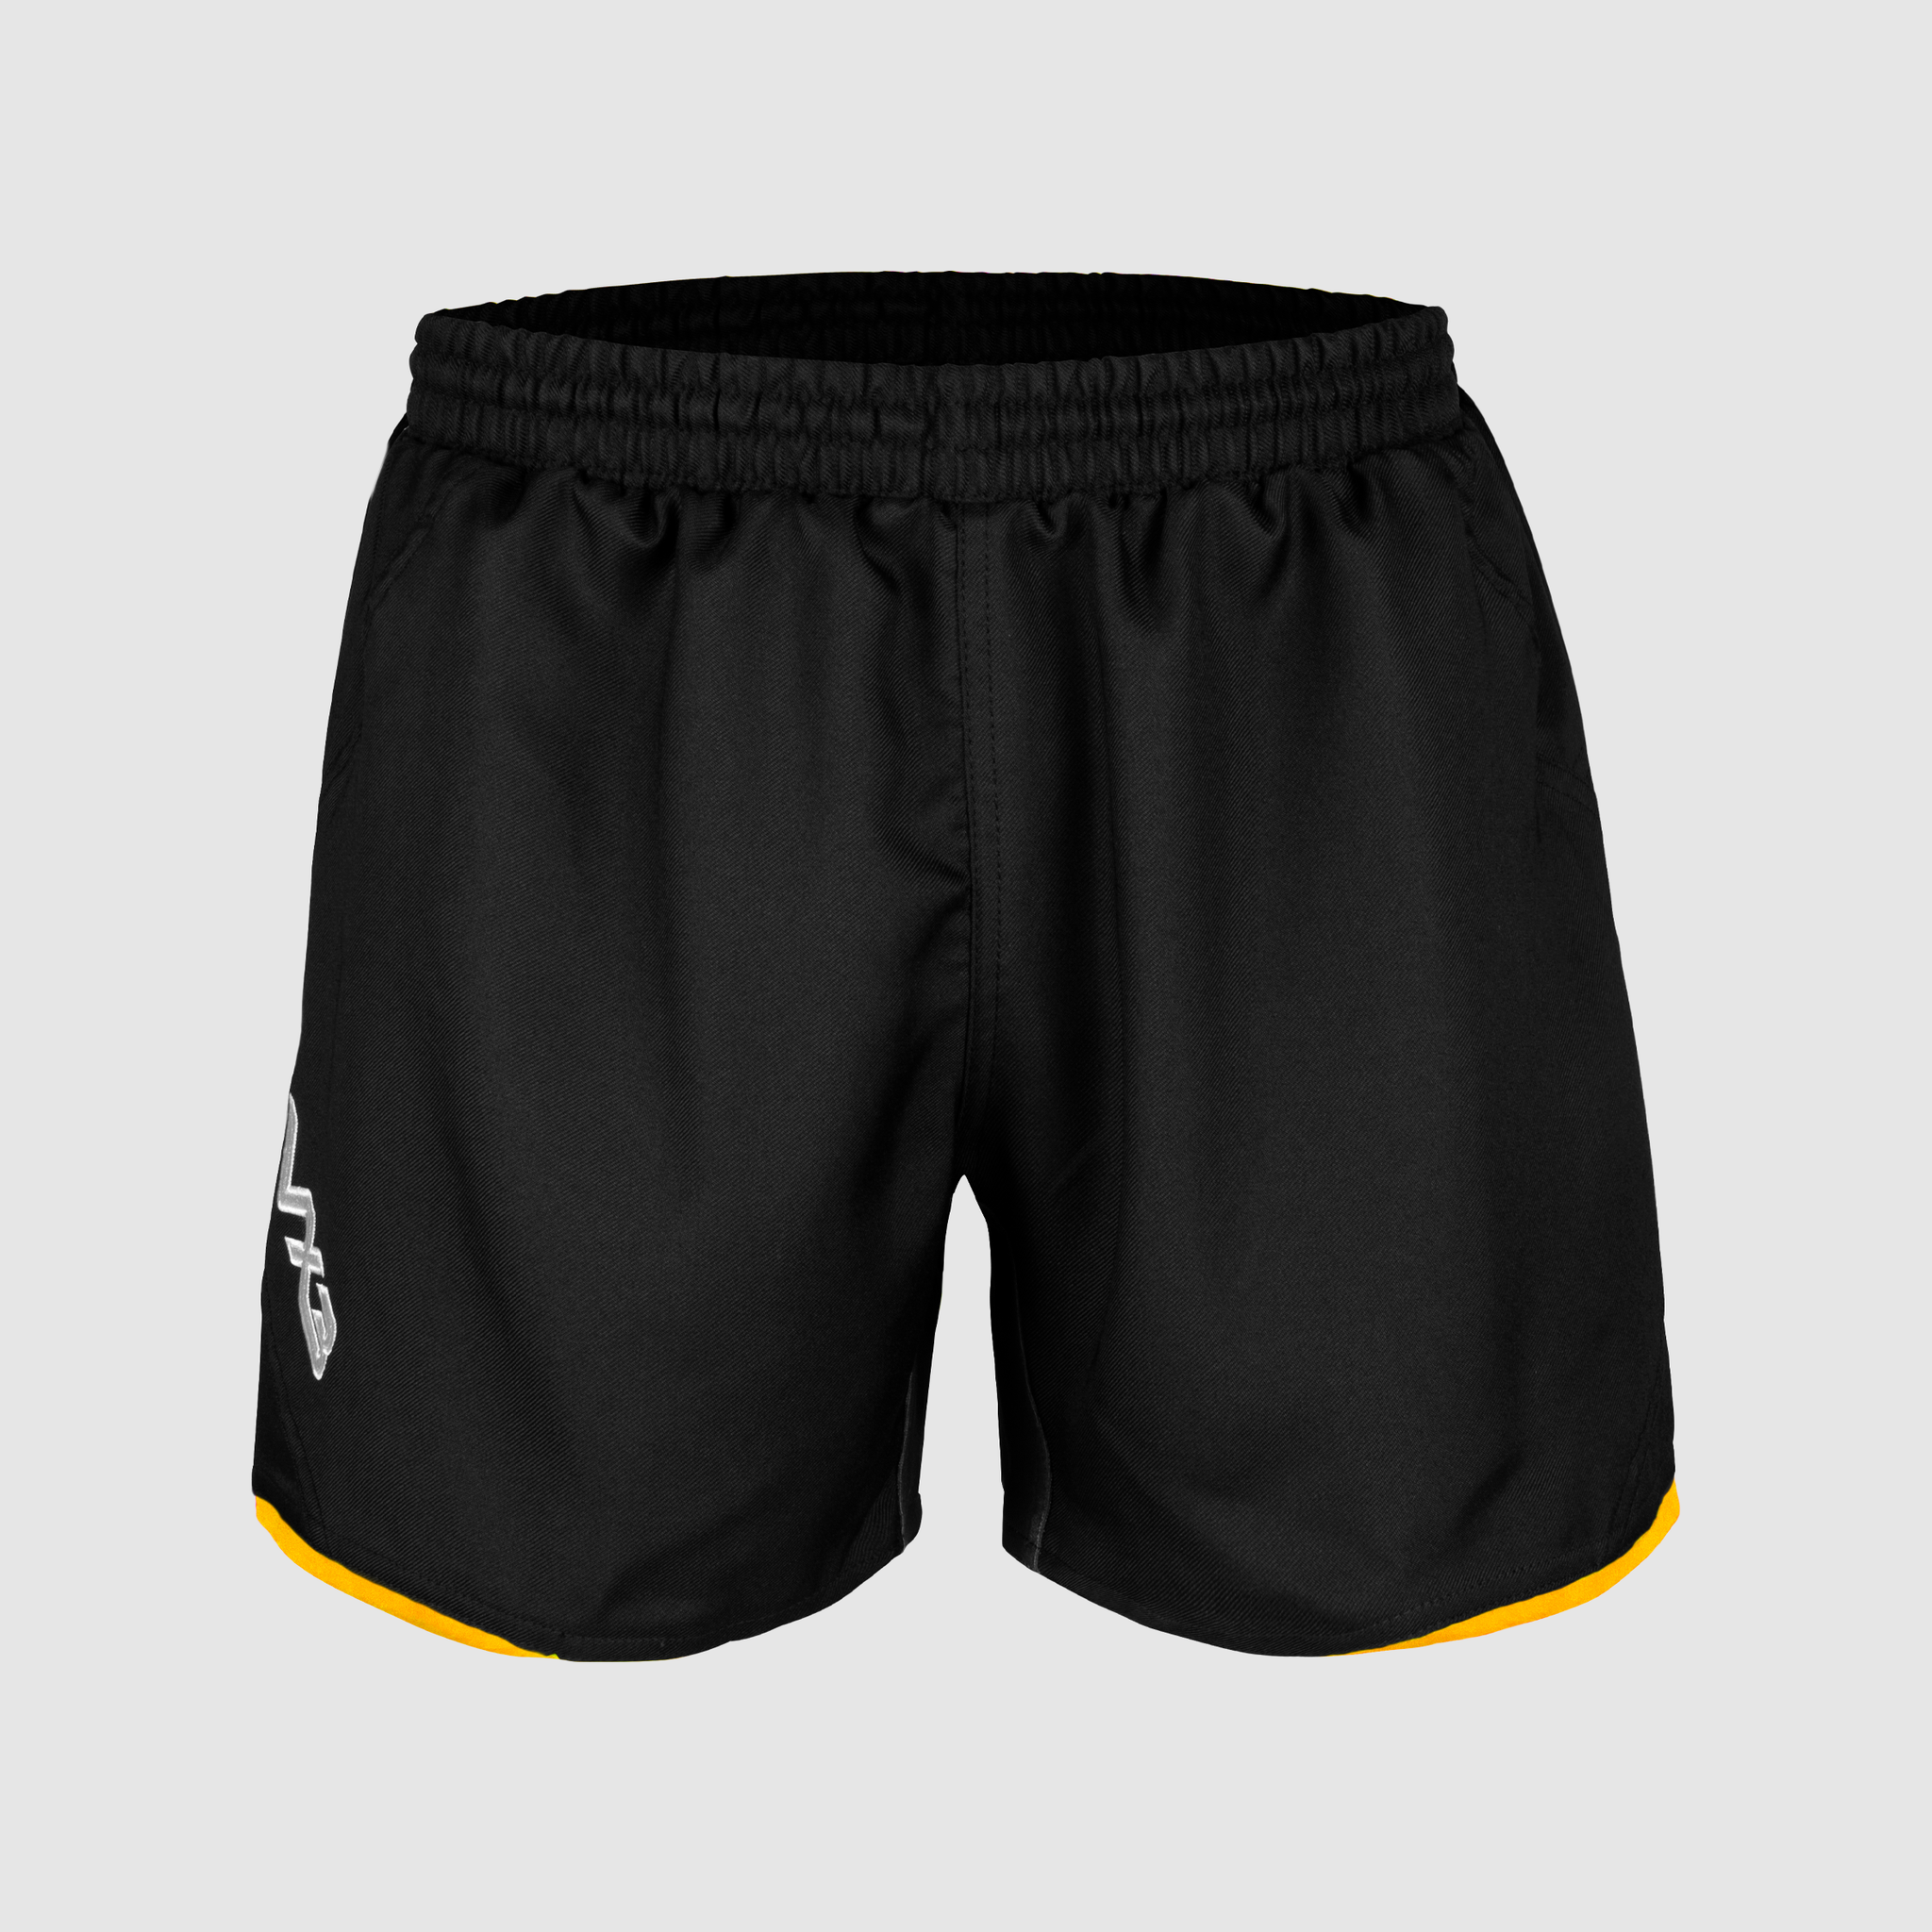 Prima Rugby Shorts Black/Amber